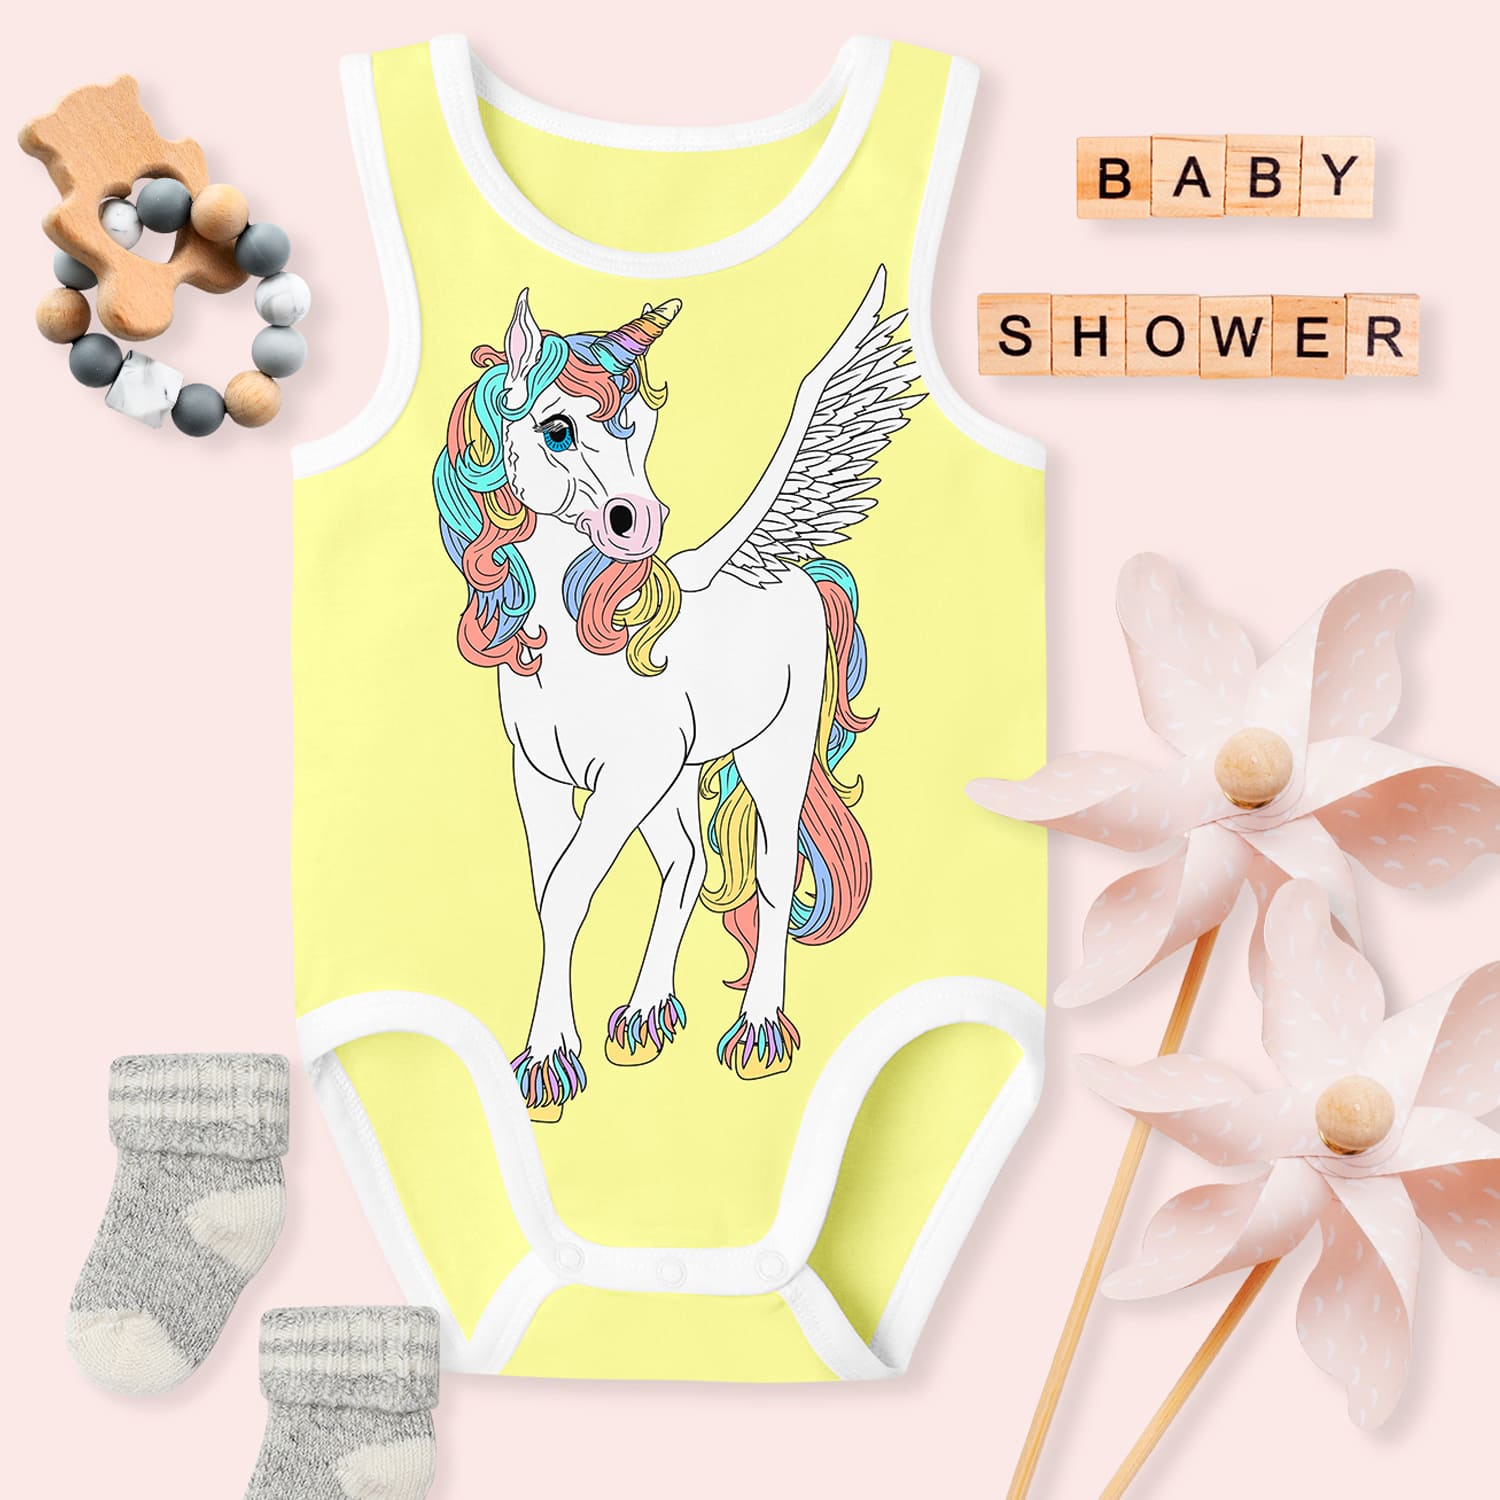 Baby clothes design with magical unicorn.